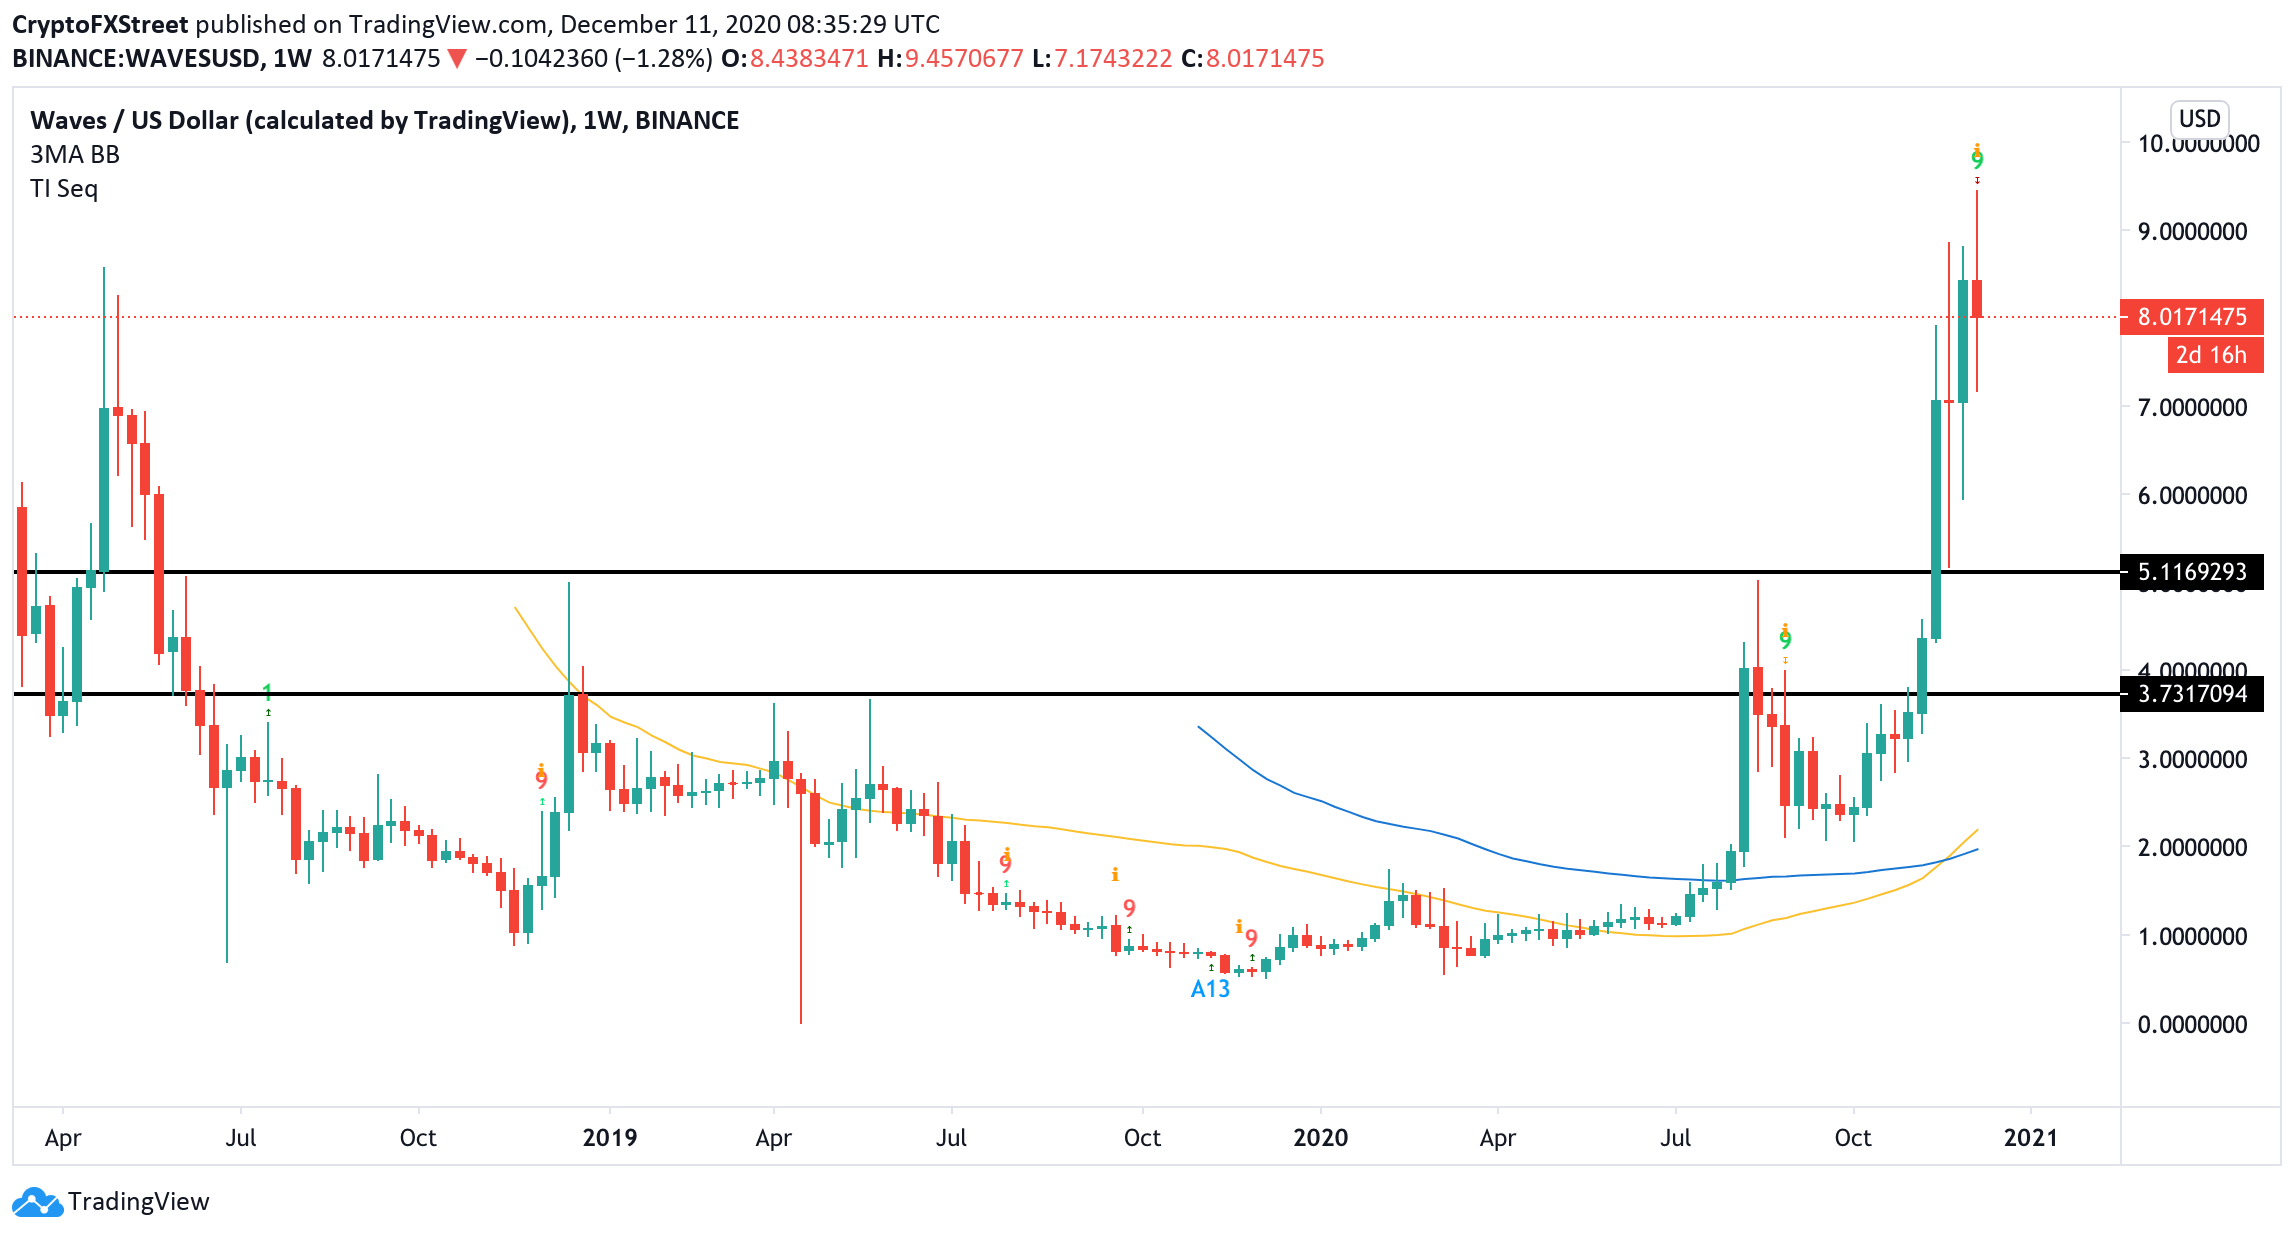 WAVES weekly chart